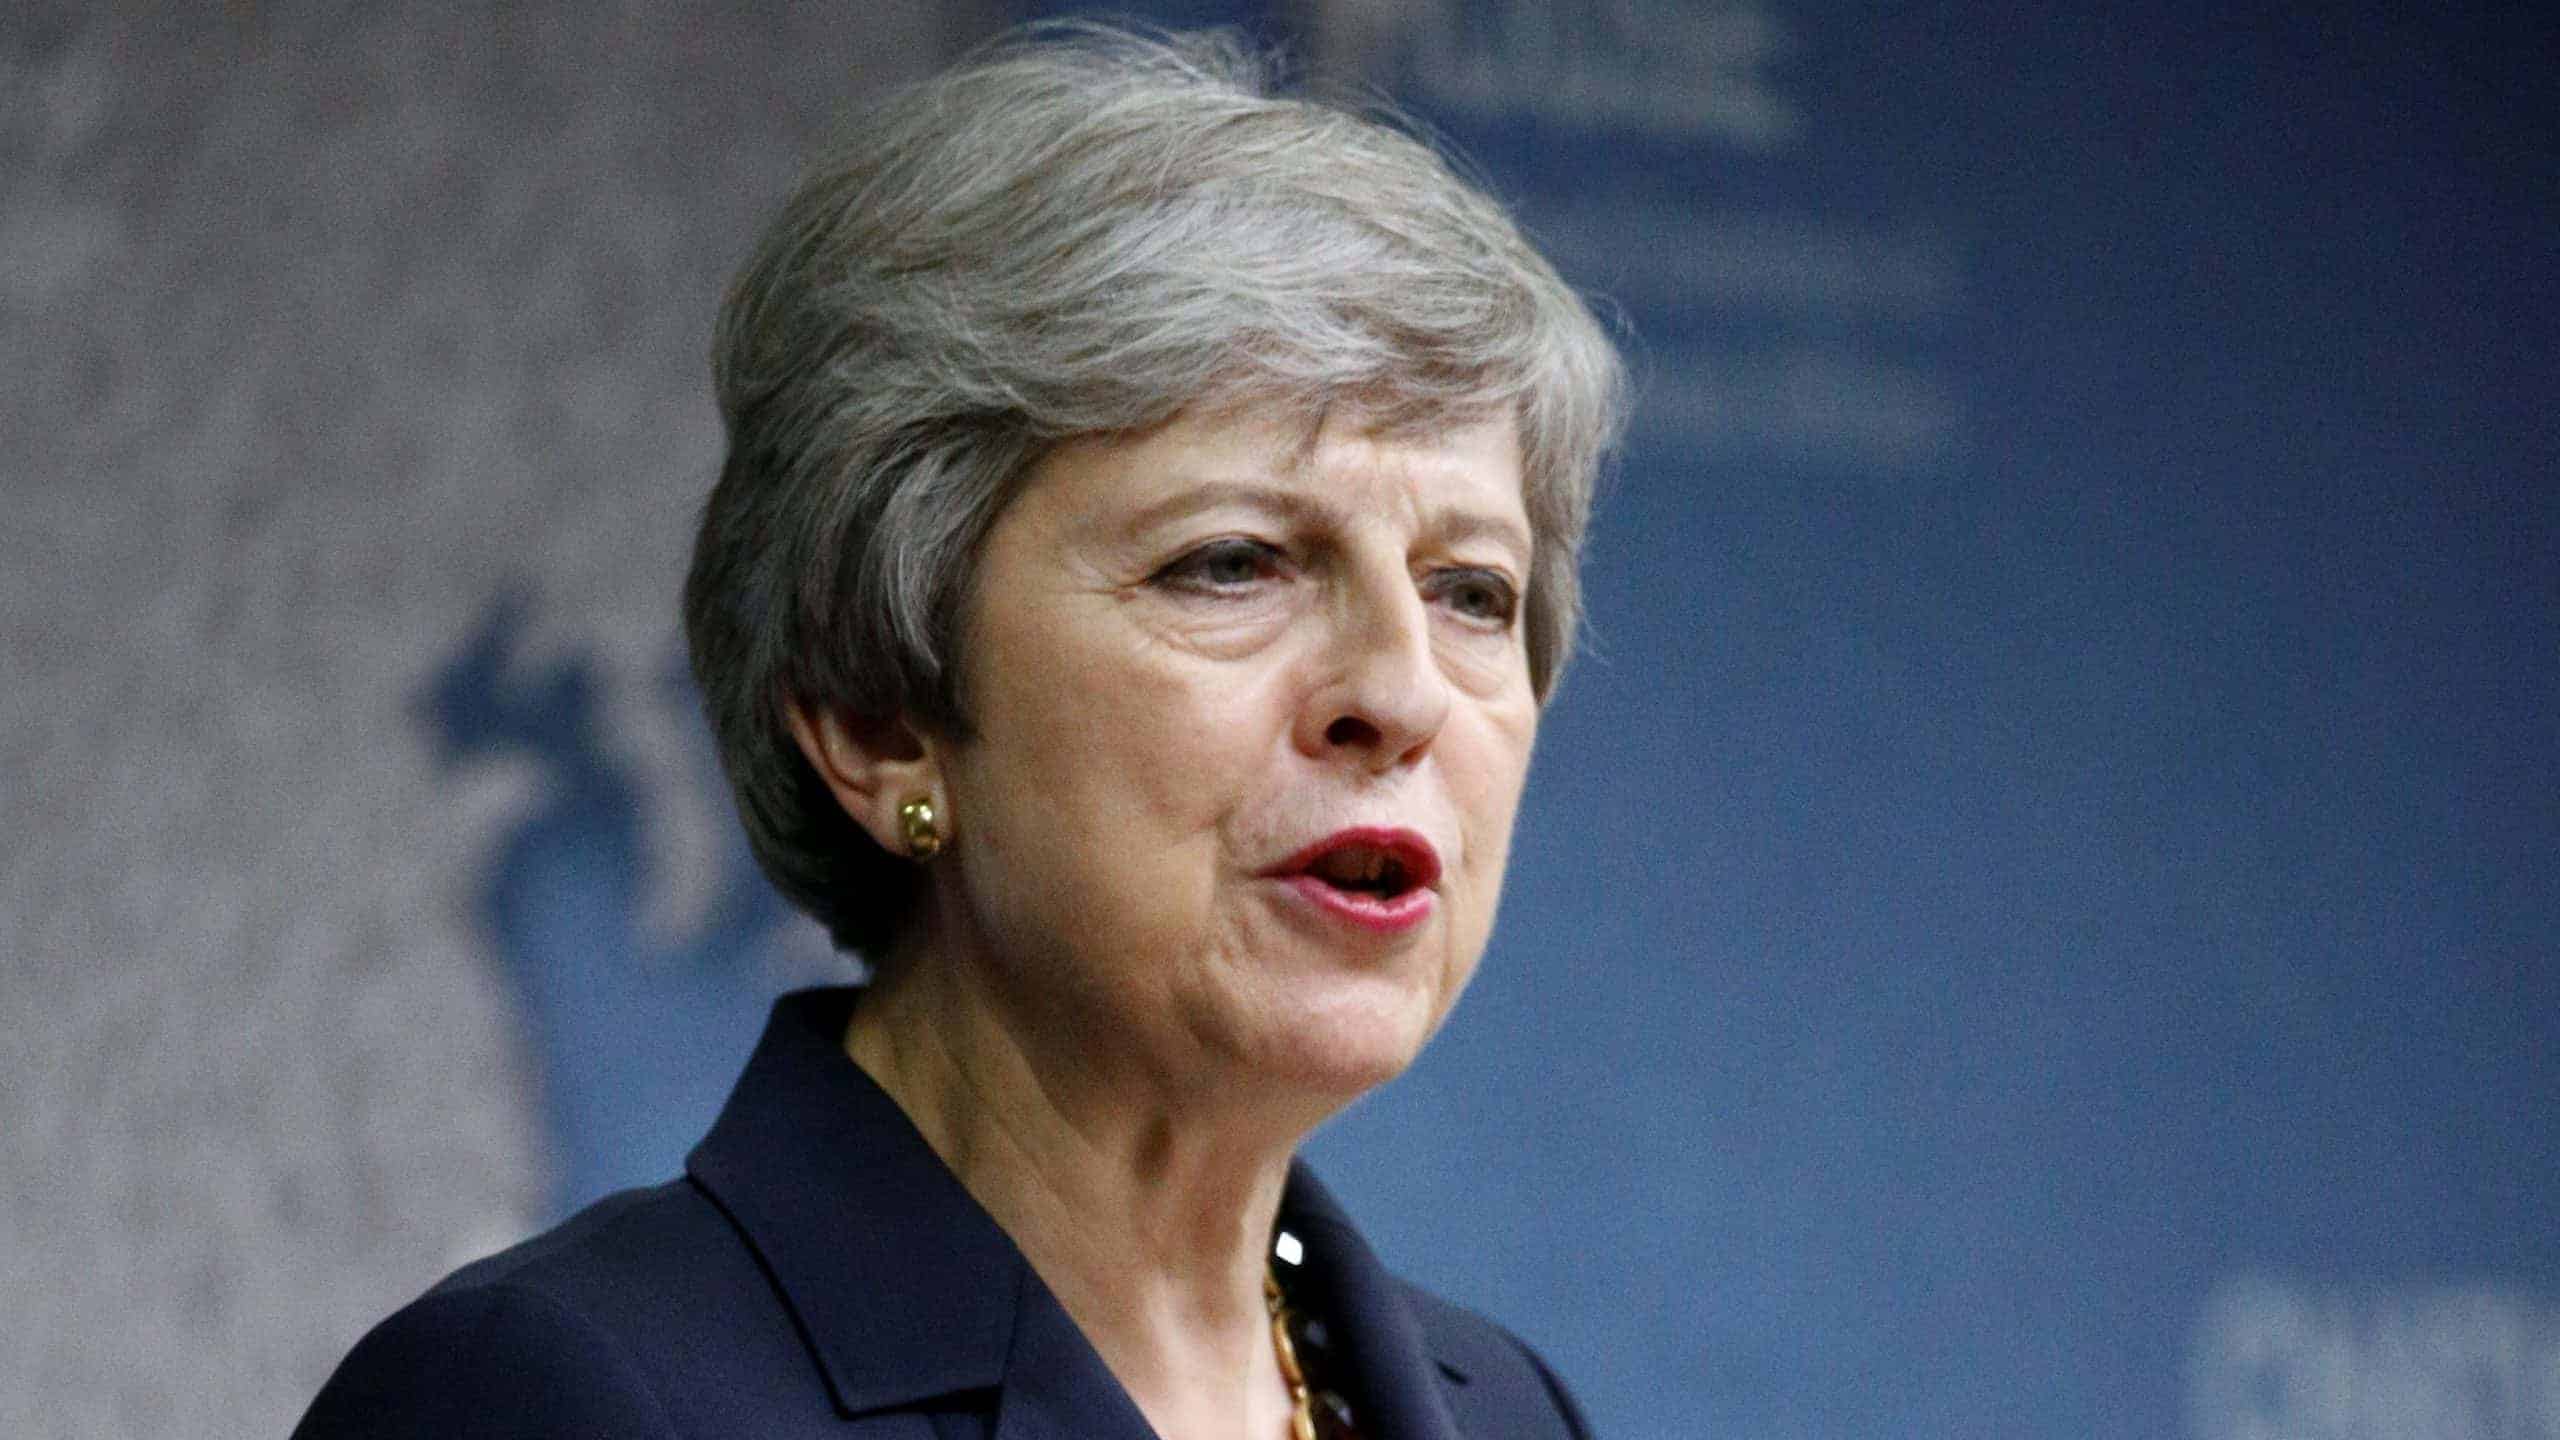 Tories want Theresa May to spearhead rebellion against Brexit bill